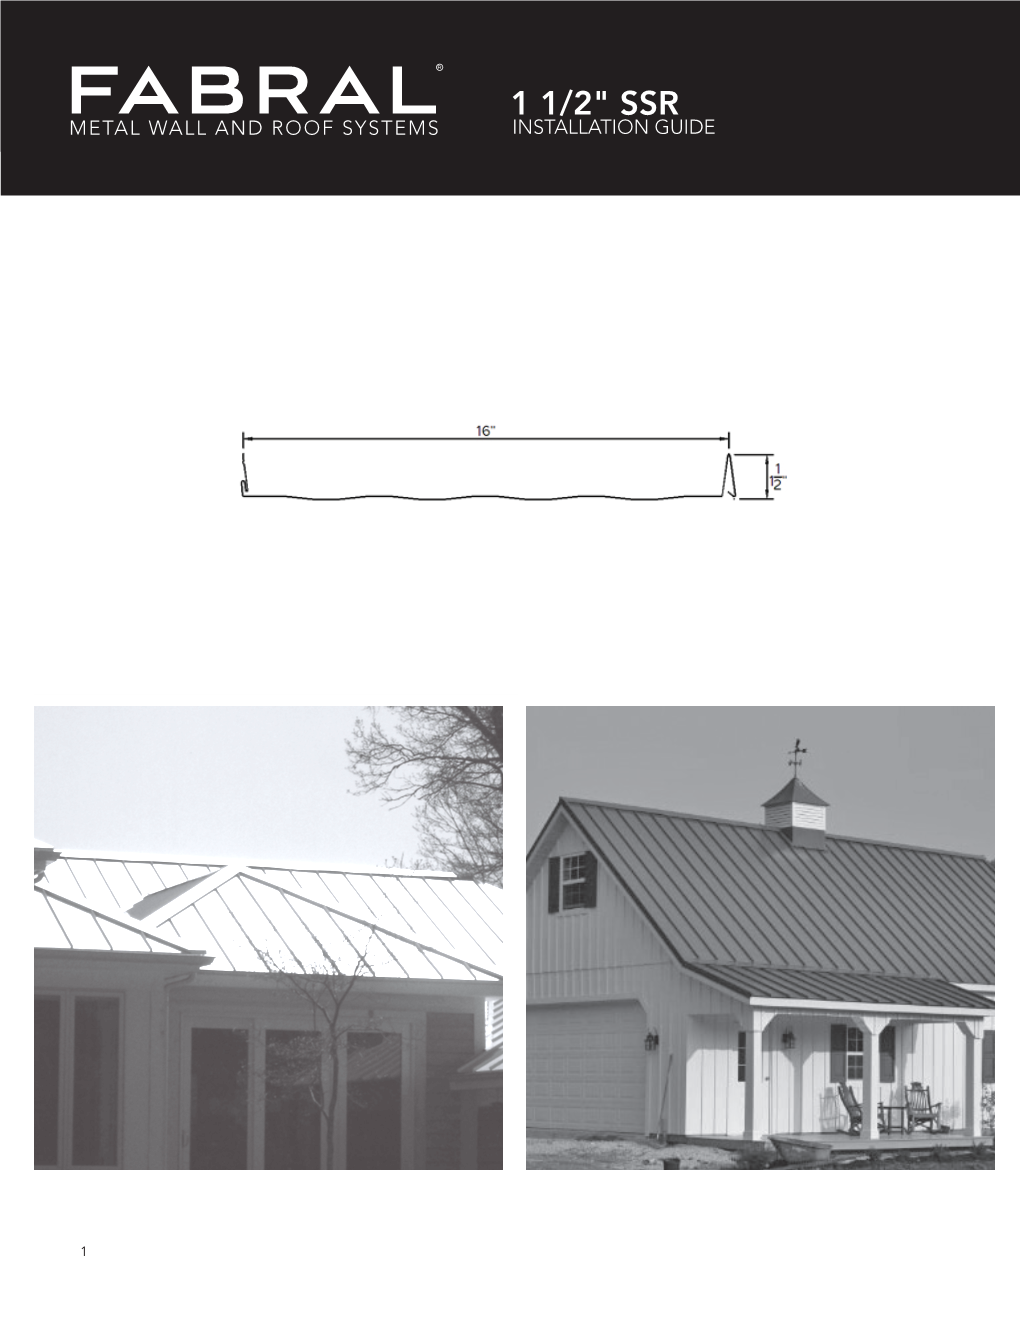 1 1/2" Ssr Metal Wall and Roof Systems Installation Guide